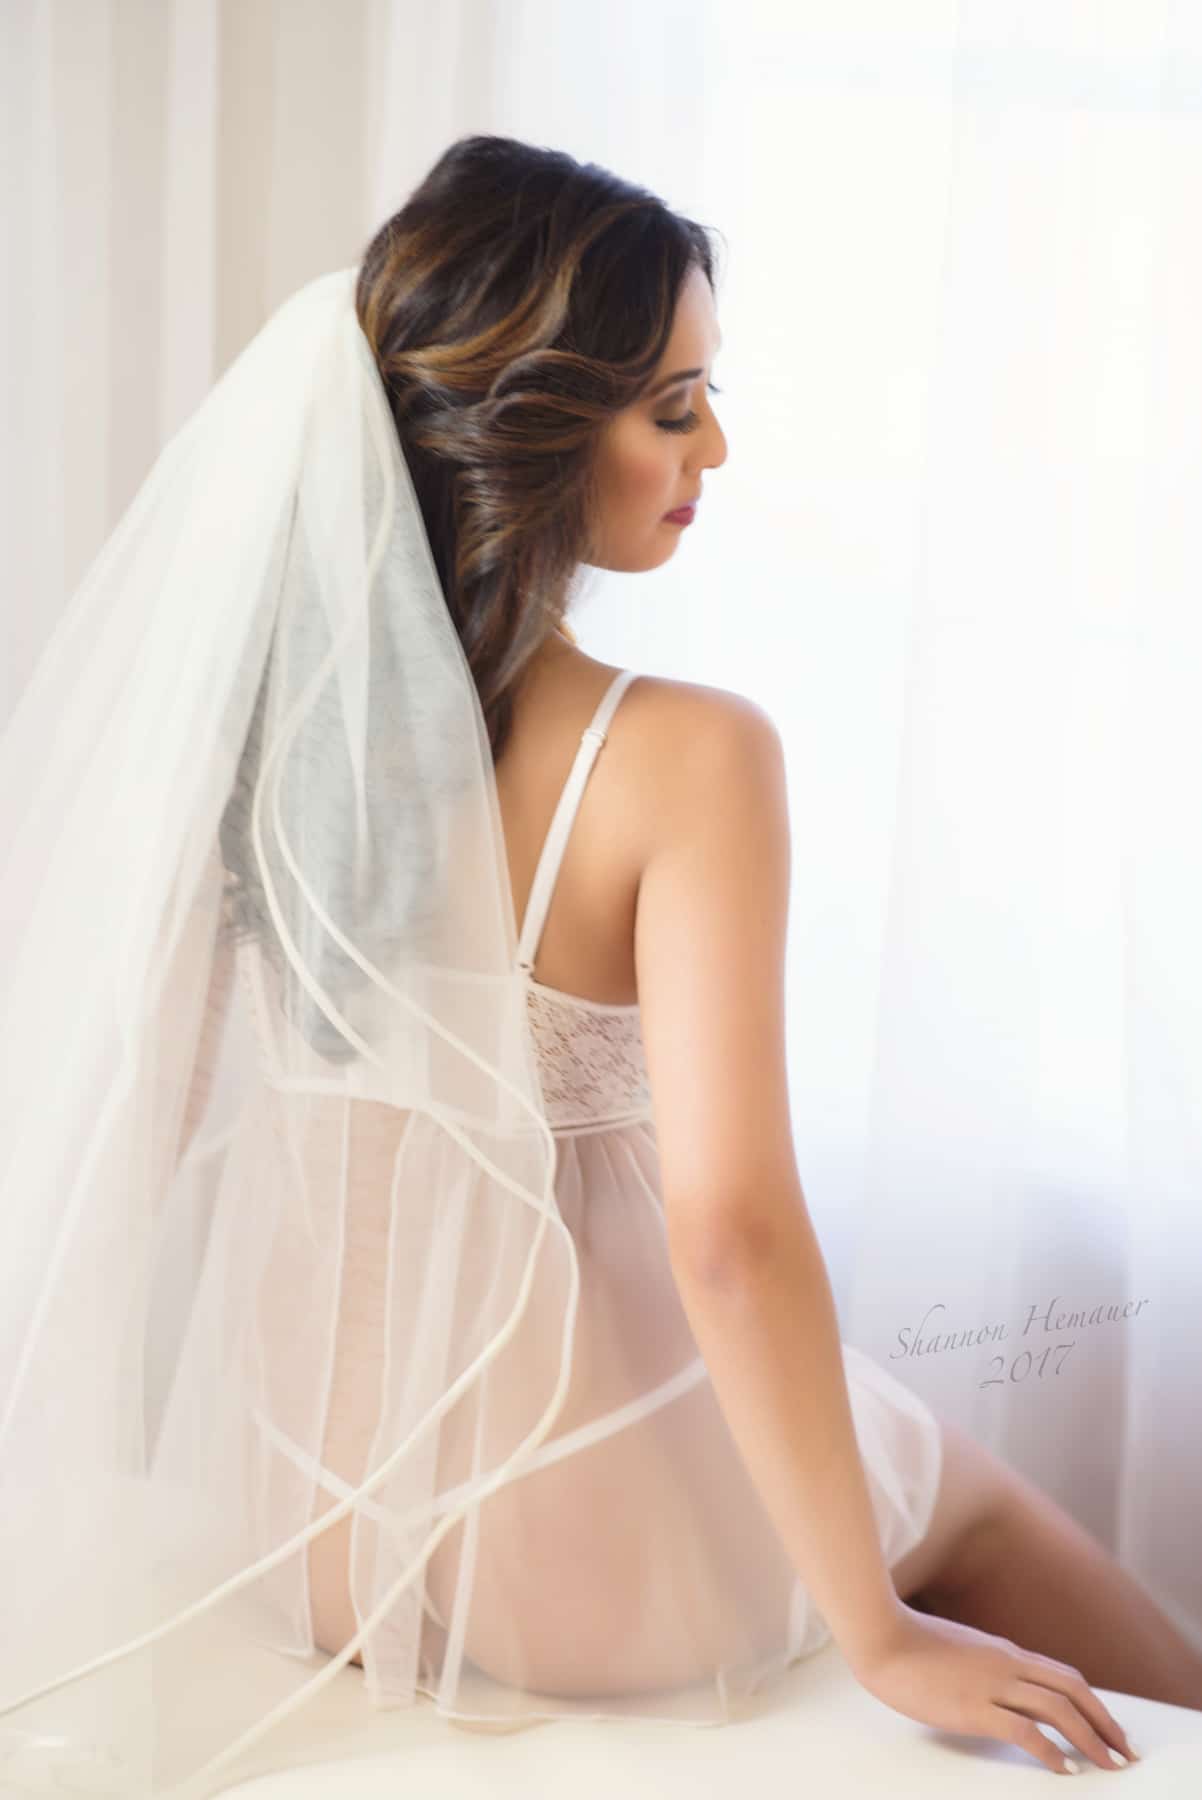 Bridal Boudoir Shannon Hemauer Photography Mechanicsburg PA and Contemporary Glamour